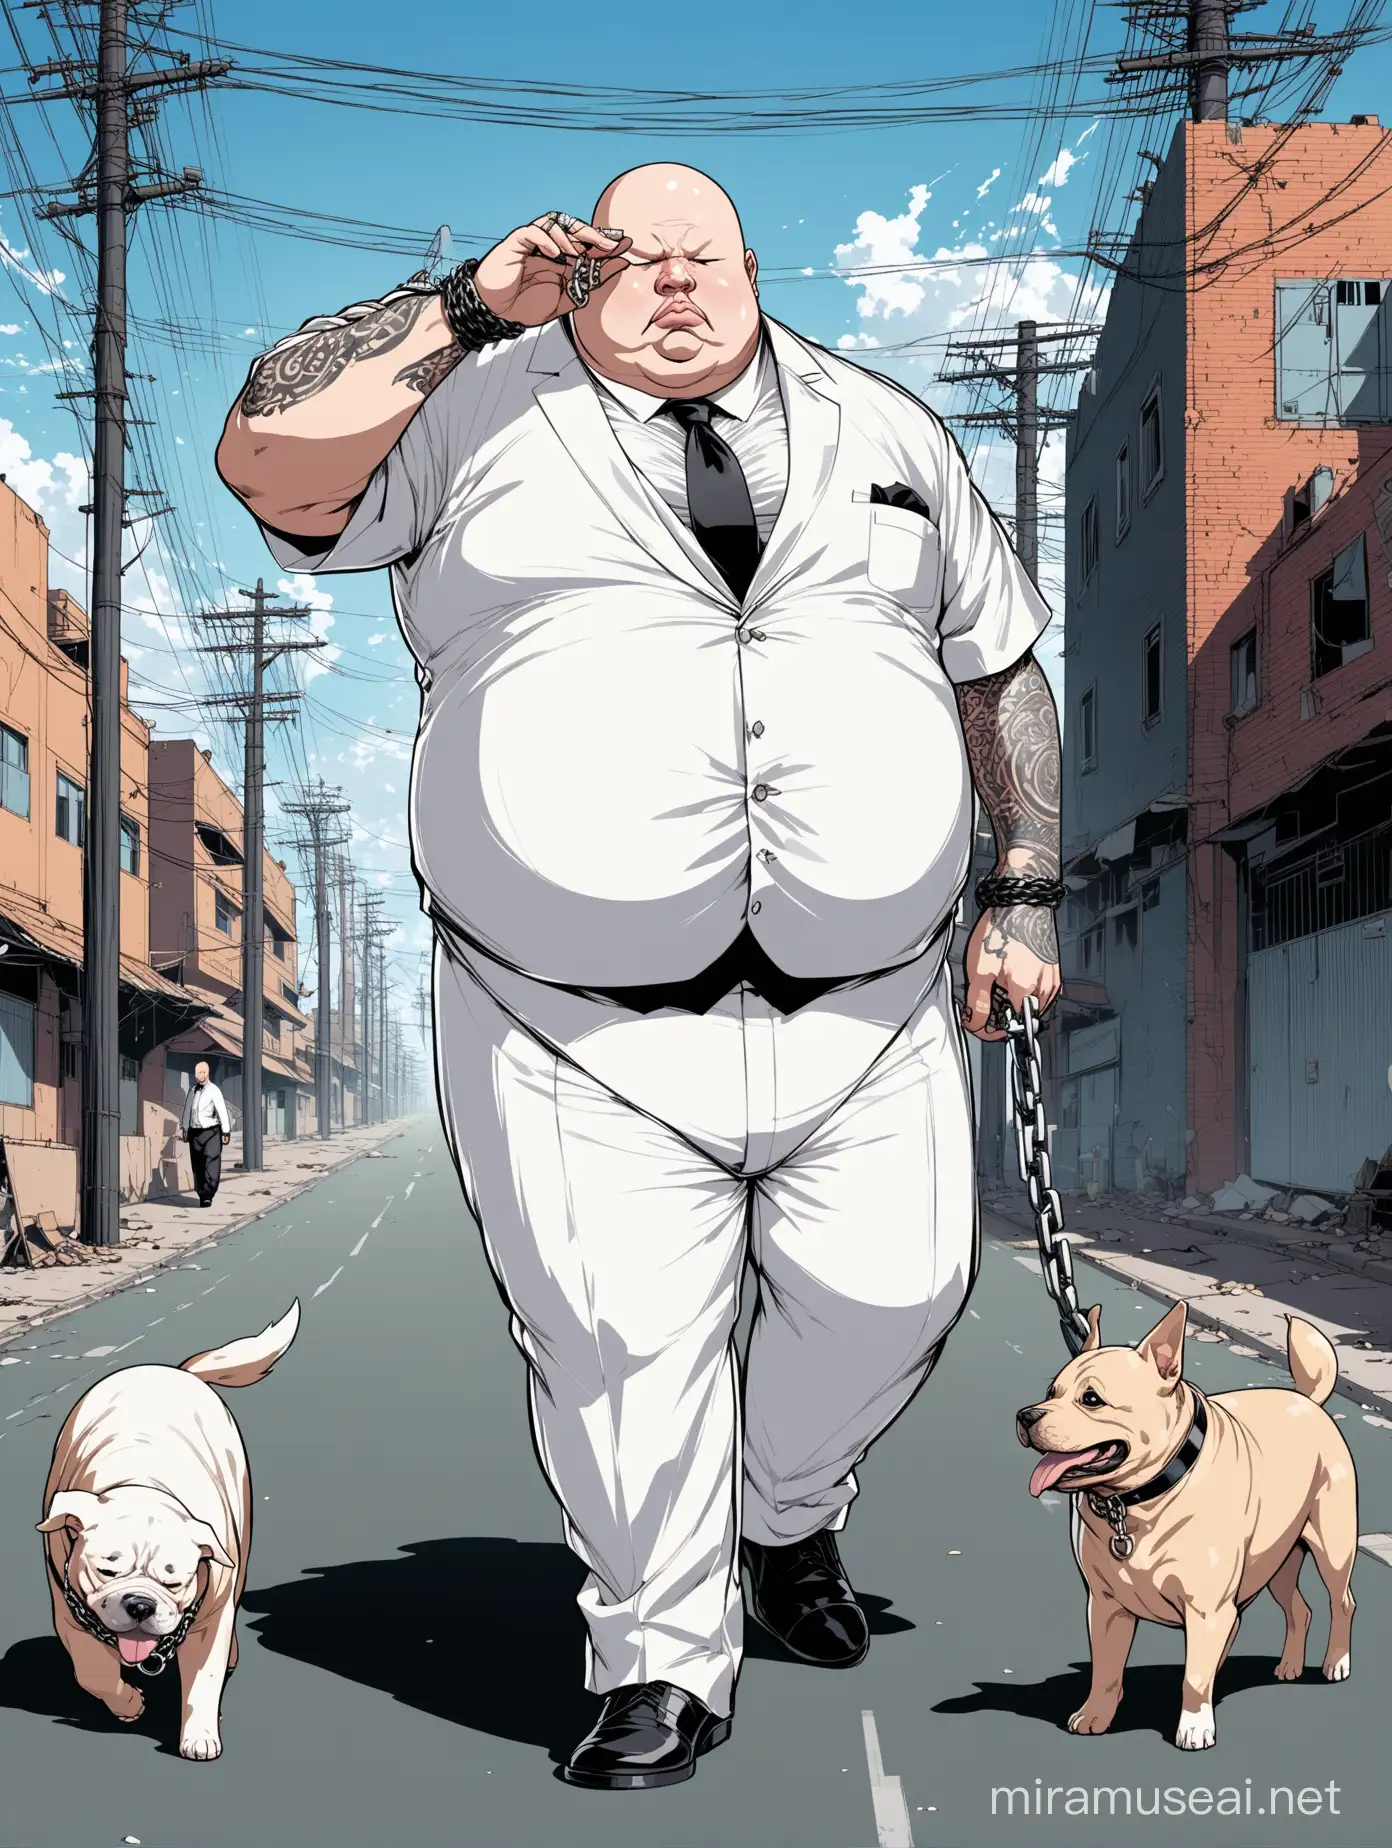 A bald, ugly, obese gang leader, wearing a white shirt, black tie, white suit, white pants, and white shoes, covering his right eye with a black patch, wearing a ring in his hand, holding a dog by a chain attached to it, and walking in the middle of a street, with buildings and electricity poles scattered along the road in the background.